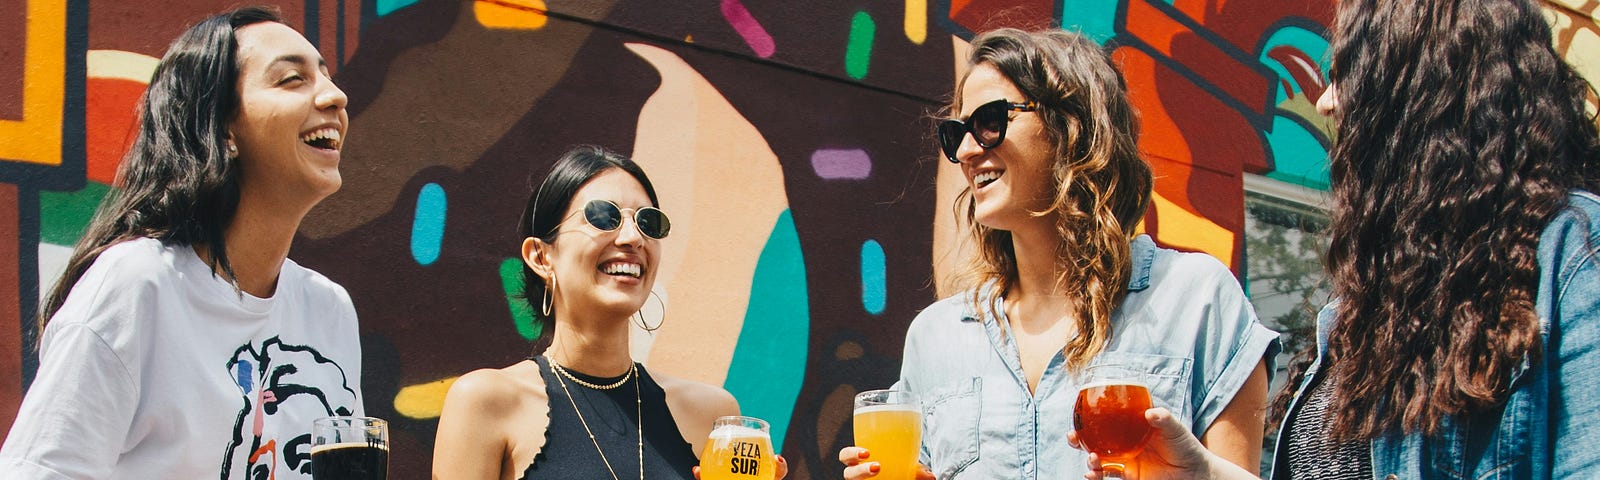 Four women in front of a mural sharing drinks, conversations, and smiles. It’s a thing!